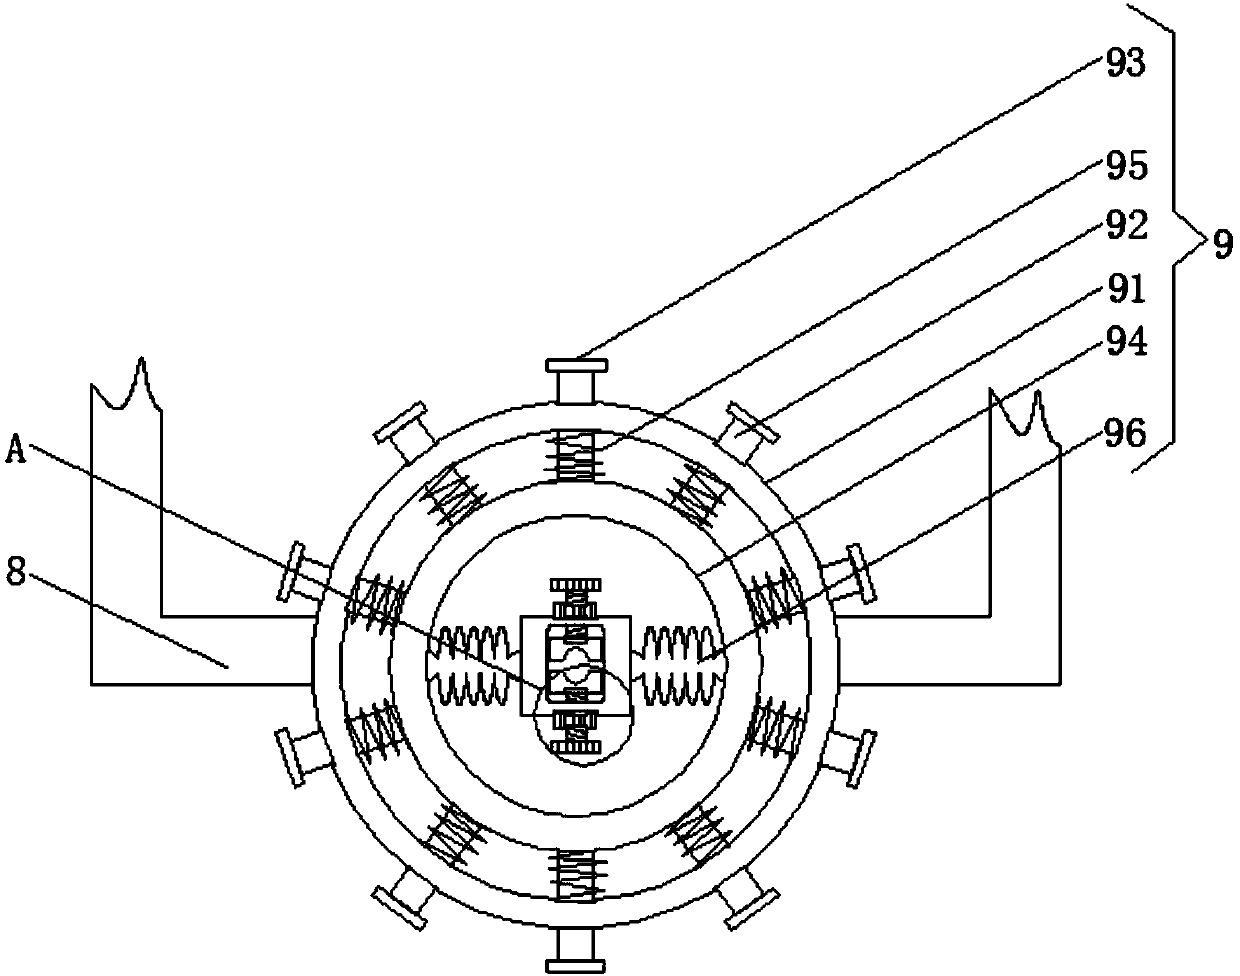 Power transmission buffer device for electric tower